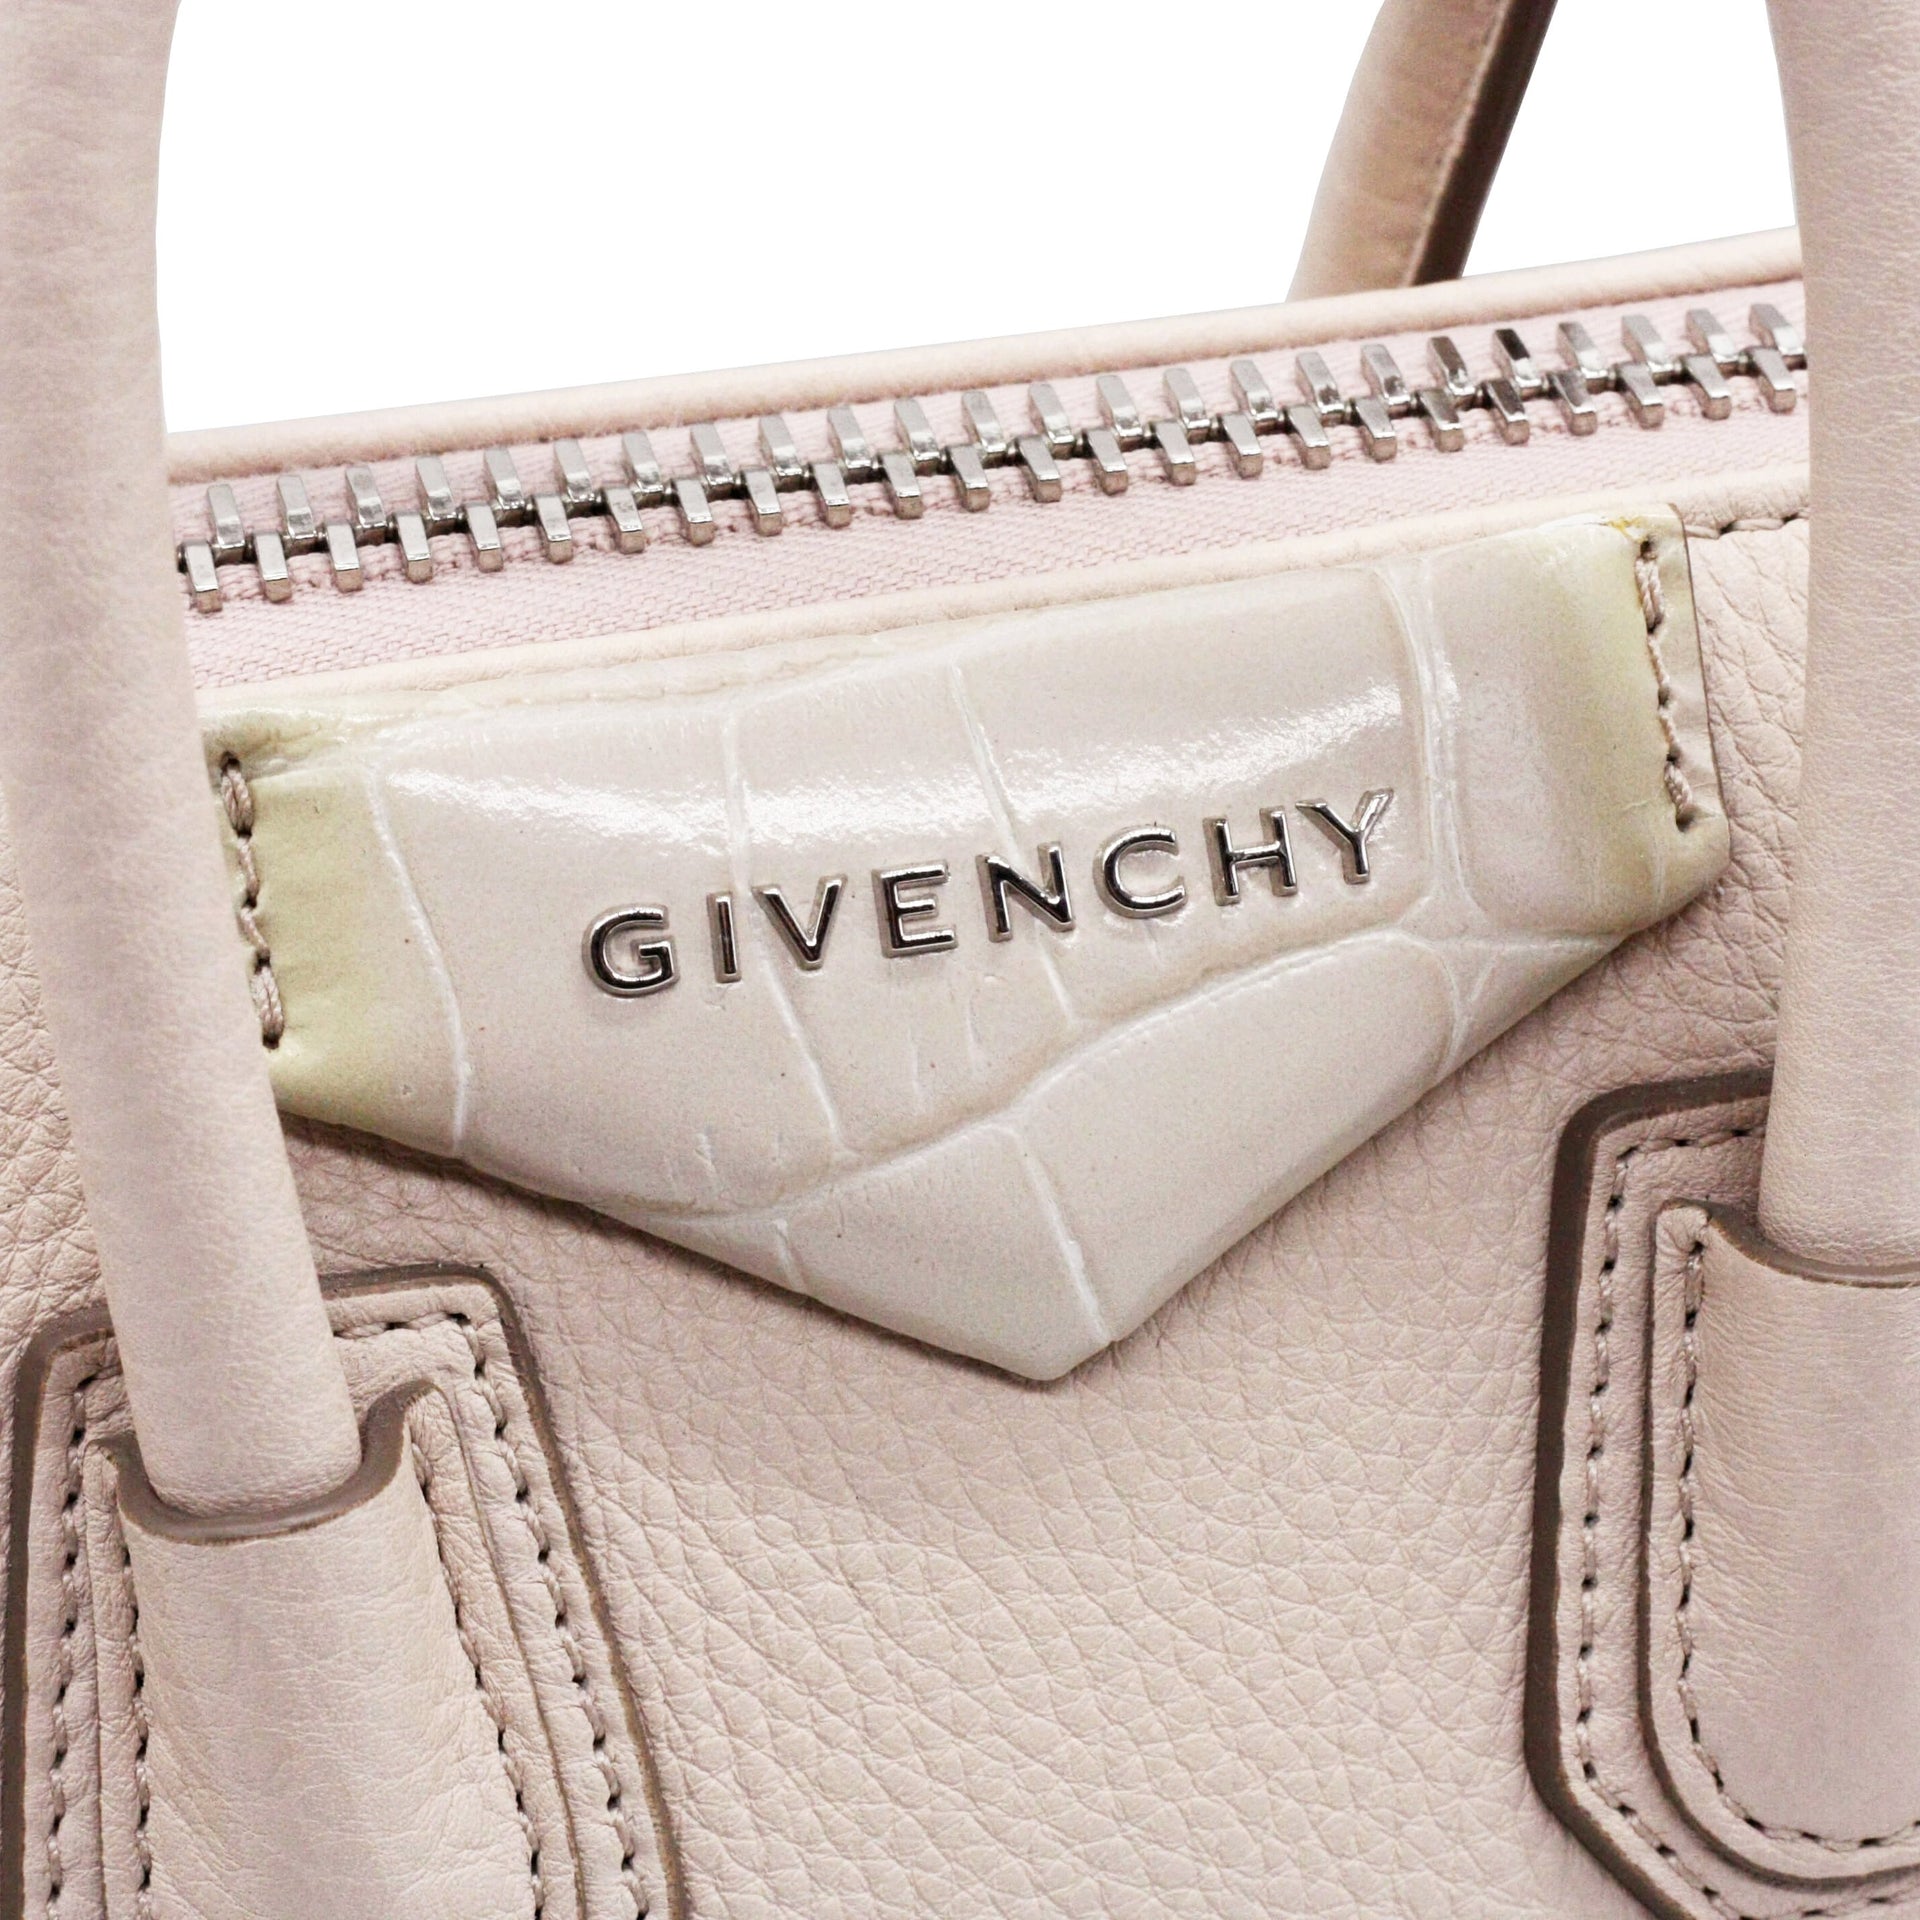 Givenchy Antigona Tote Small Light Pink in Leather with Silver-Tone - US